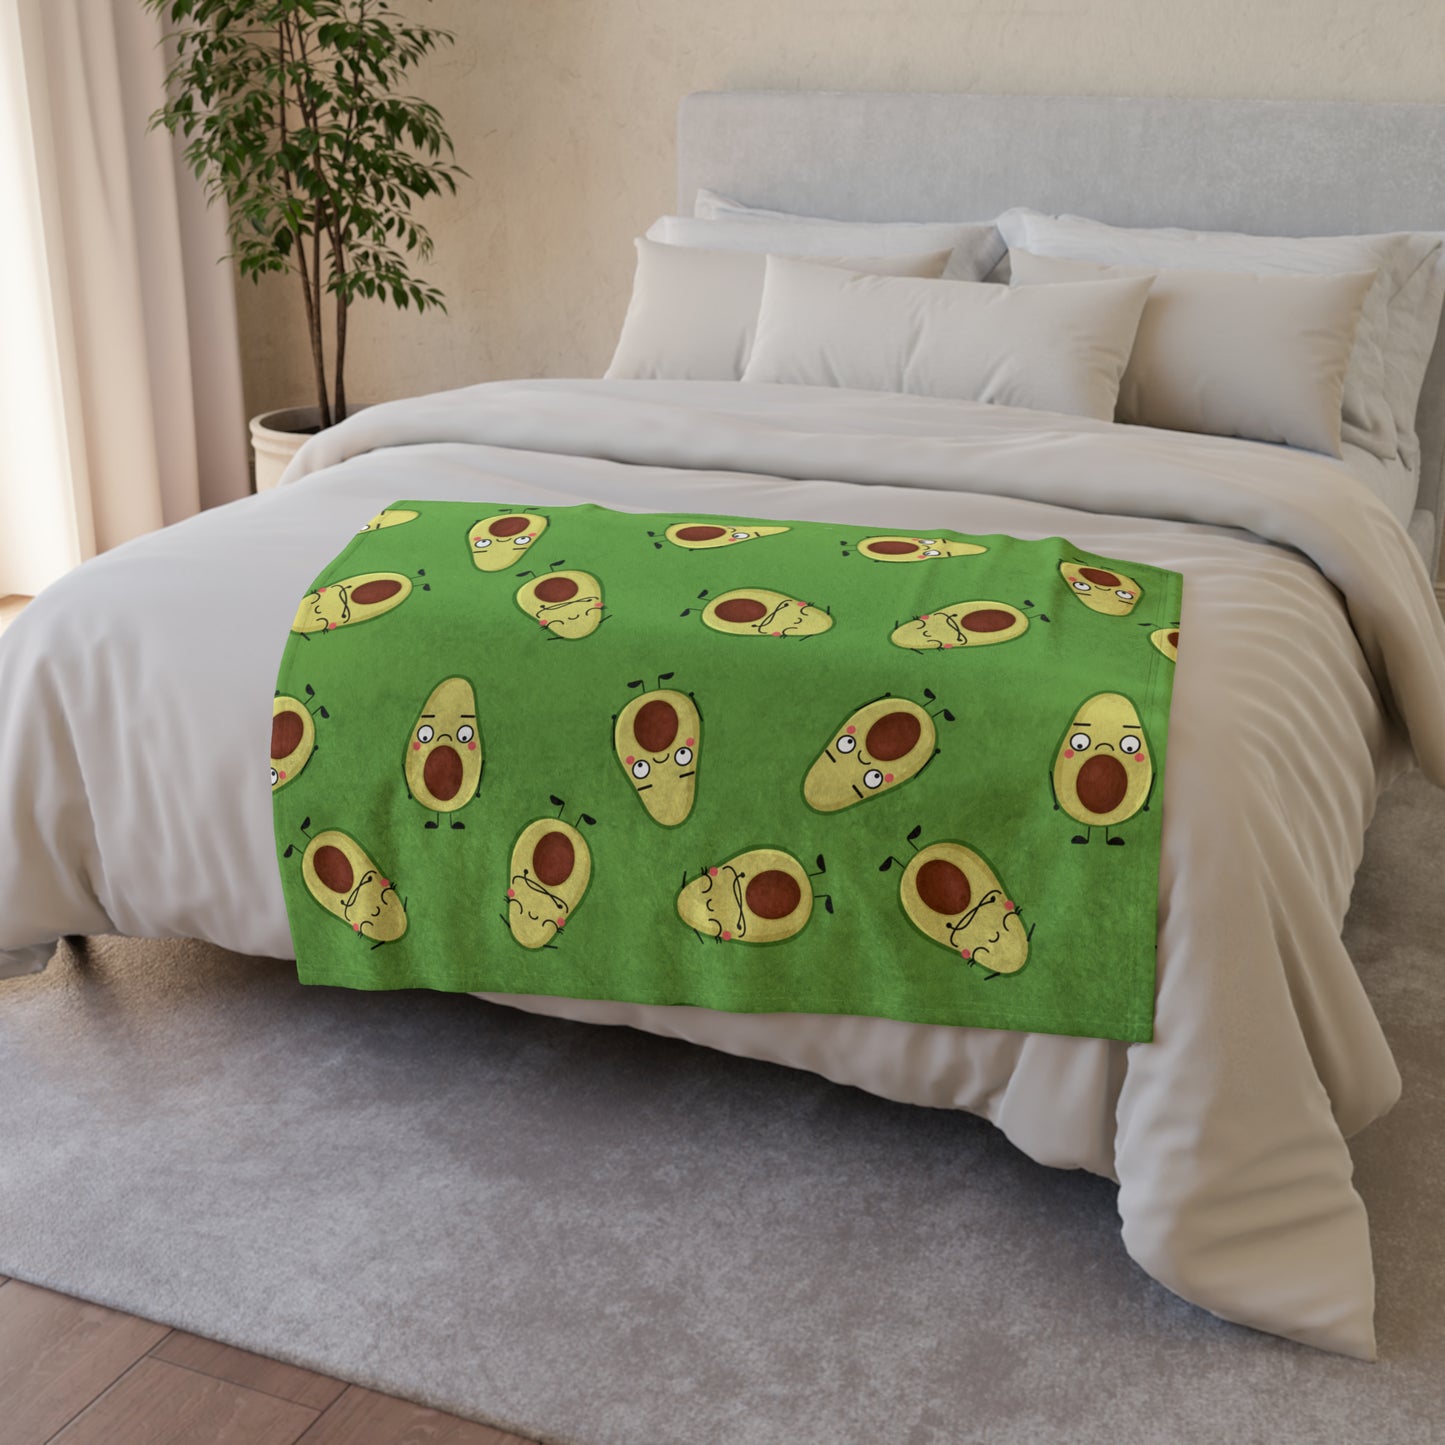 Avocado Characters - Soft Polyester Blanket 30'' × 40'' Blanket Food